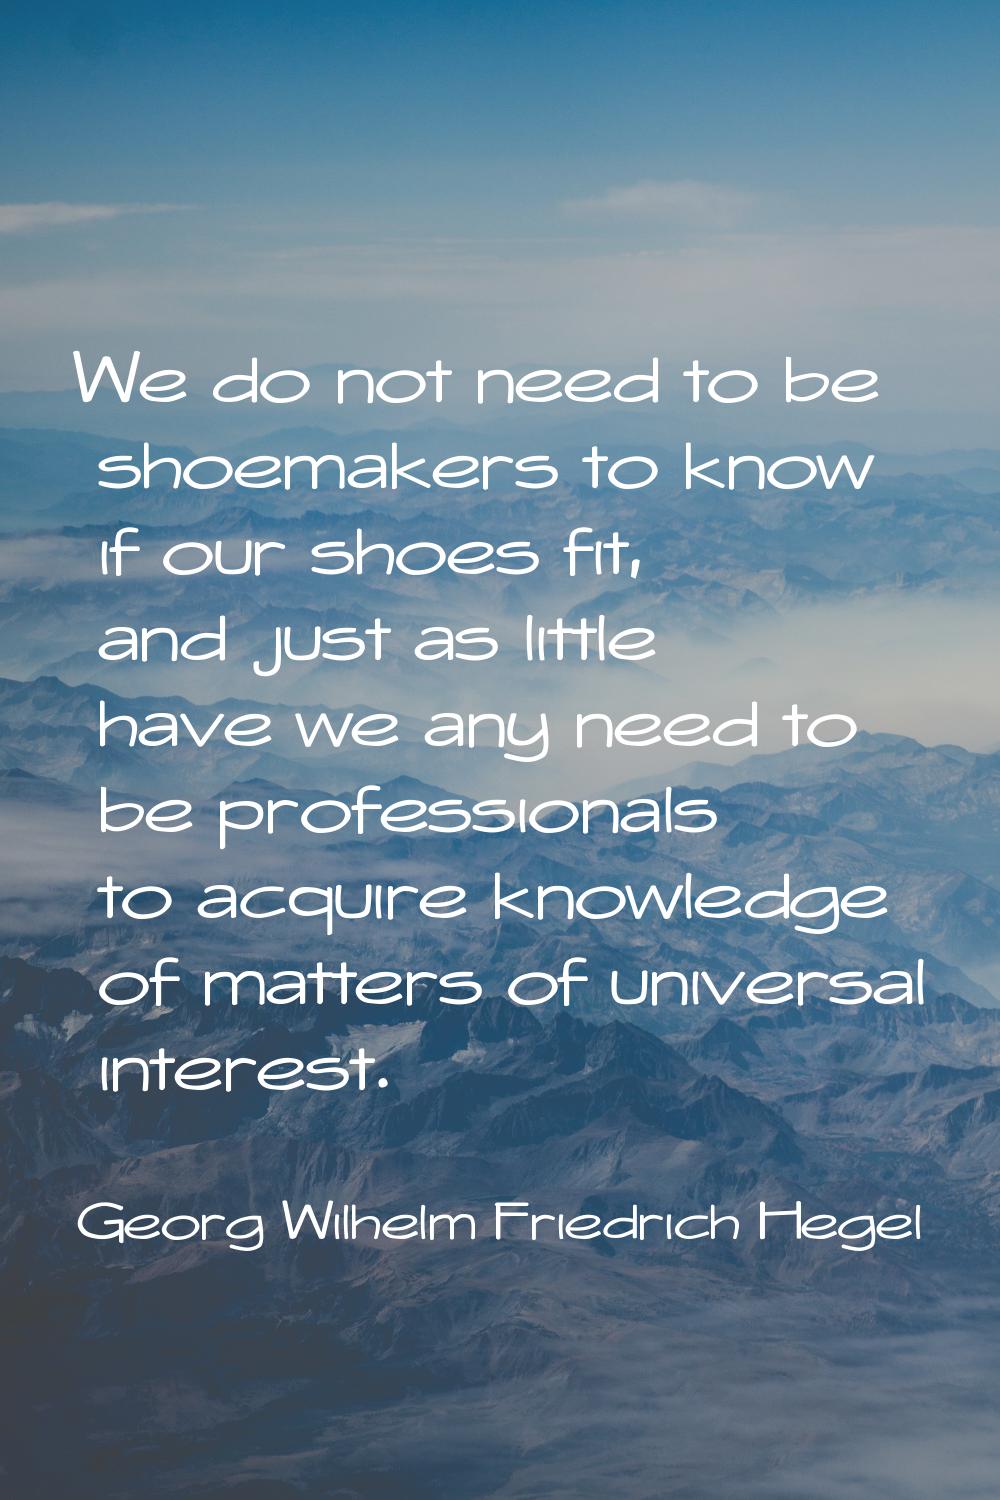 We do not need to be shoemakers to know if our shoes fit, and just as little have we any need to be